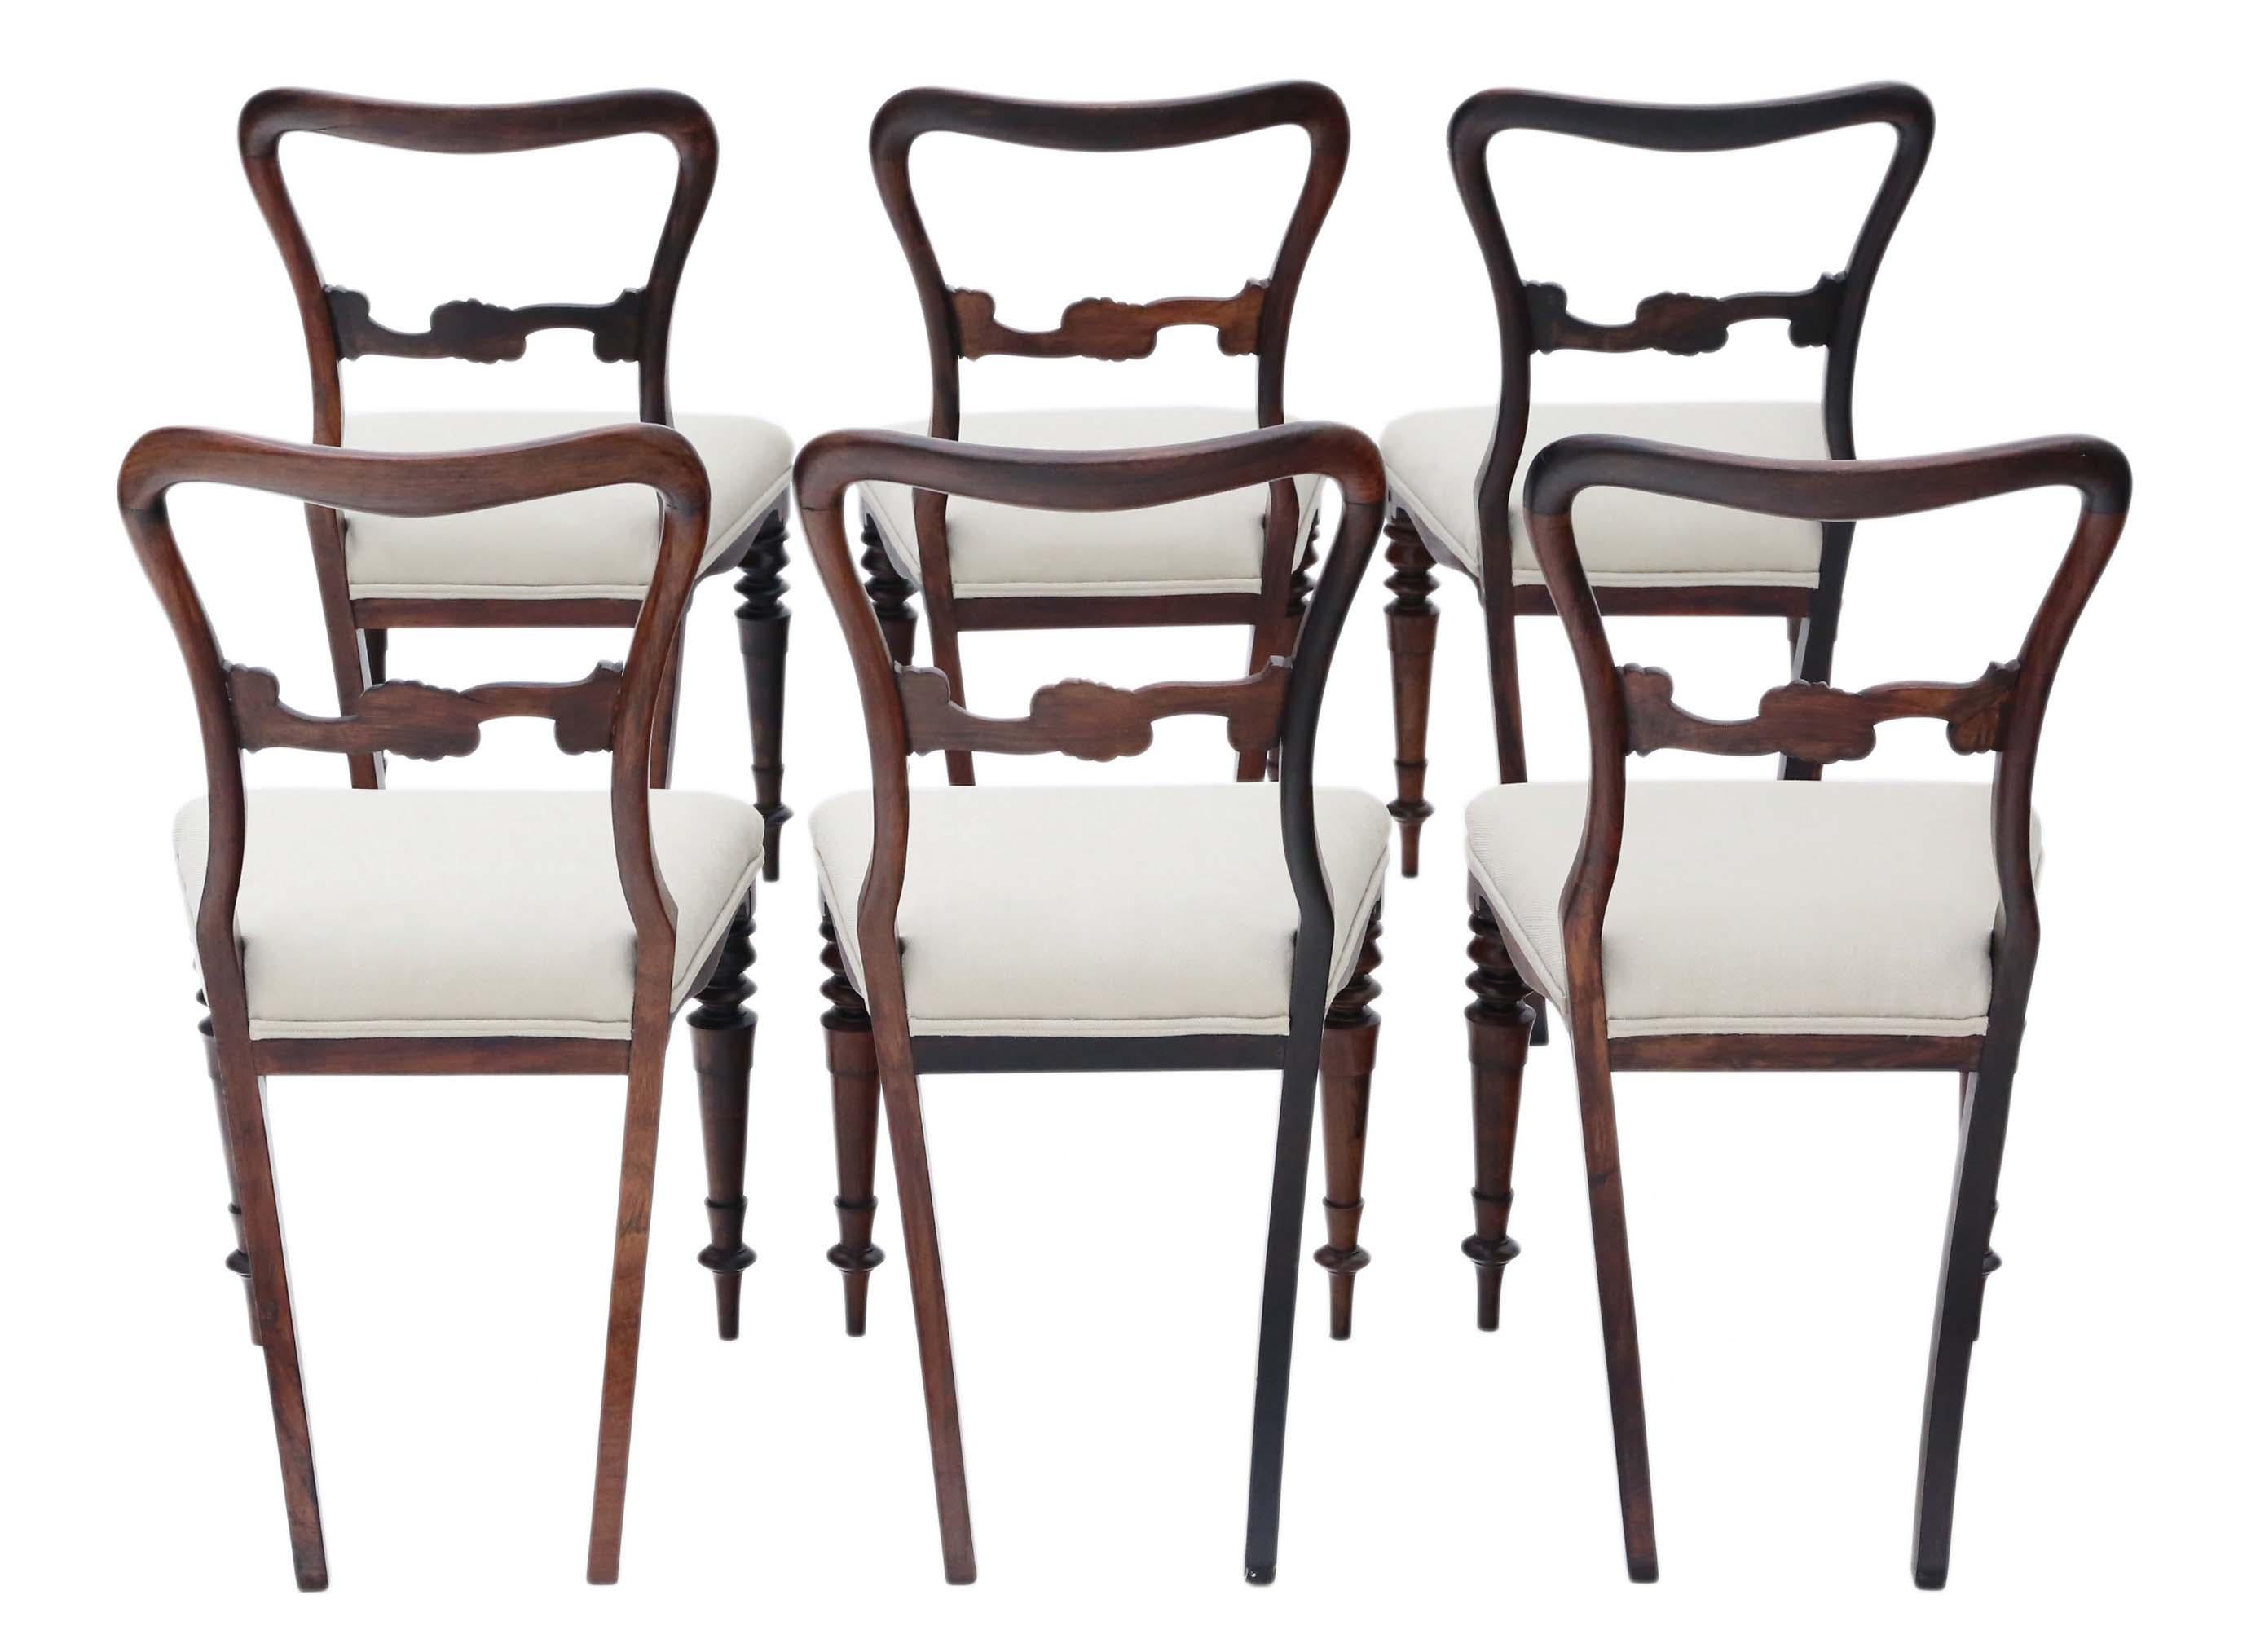 Antique quality set of 6 Victorian rosewood dining chairs circa 1870.
Solid with no loose joints. Lovely elegant design. No woodworm.
New upholstery in a heavy weight fabric.
Overall maximum dimensions:
43cm W x 49cm D x 85cm H (43cmH seat when